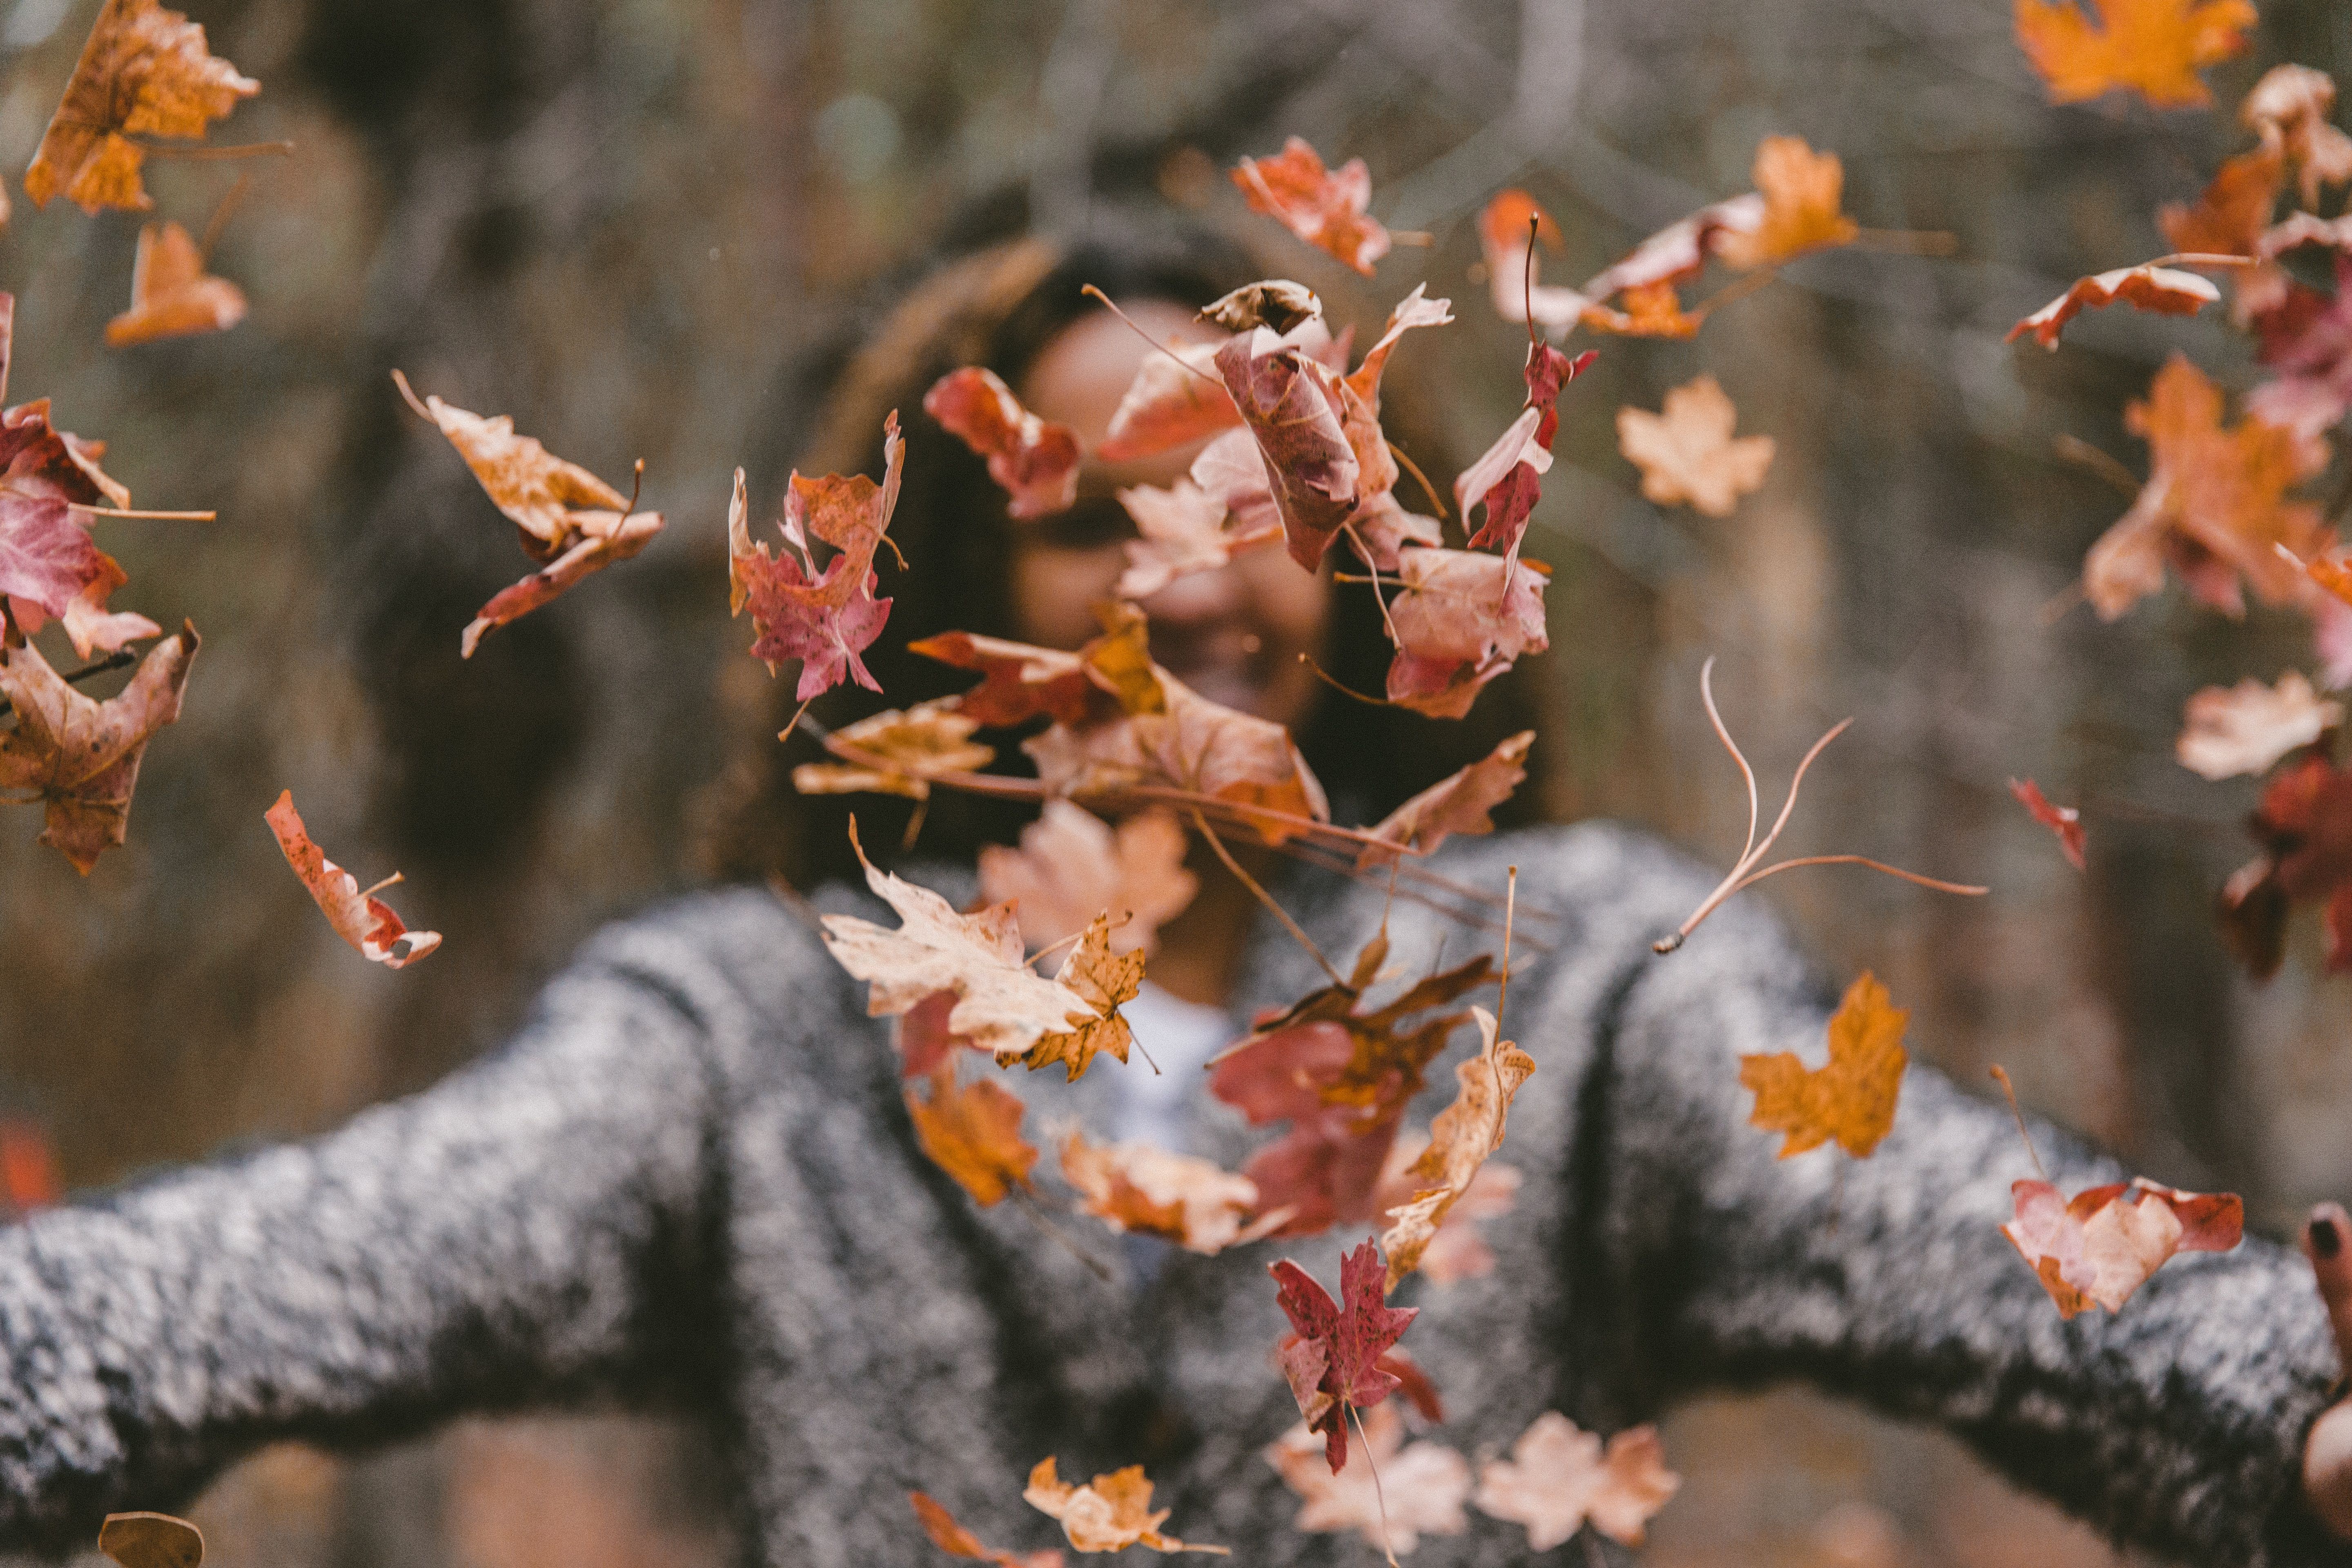 5760x3840 #nature, #outdoor, #fall wallpaper, #throwing, #happy, #Free image, #wallpaper, #fall, #leaf, #leafe, #woman, #female, #autumn, #leaves, #lady, #arms, #fall background, #falling, #leafs, #throw, #autumnal. Mocah.org HD Desktop